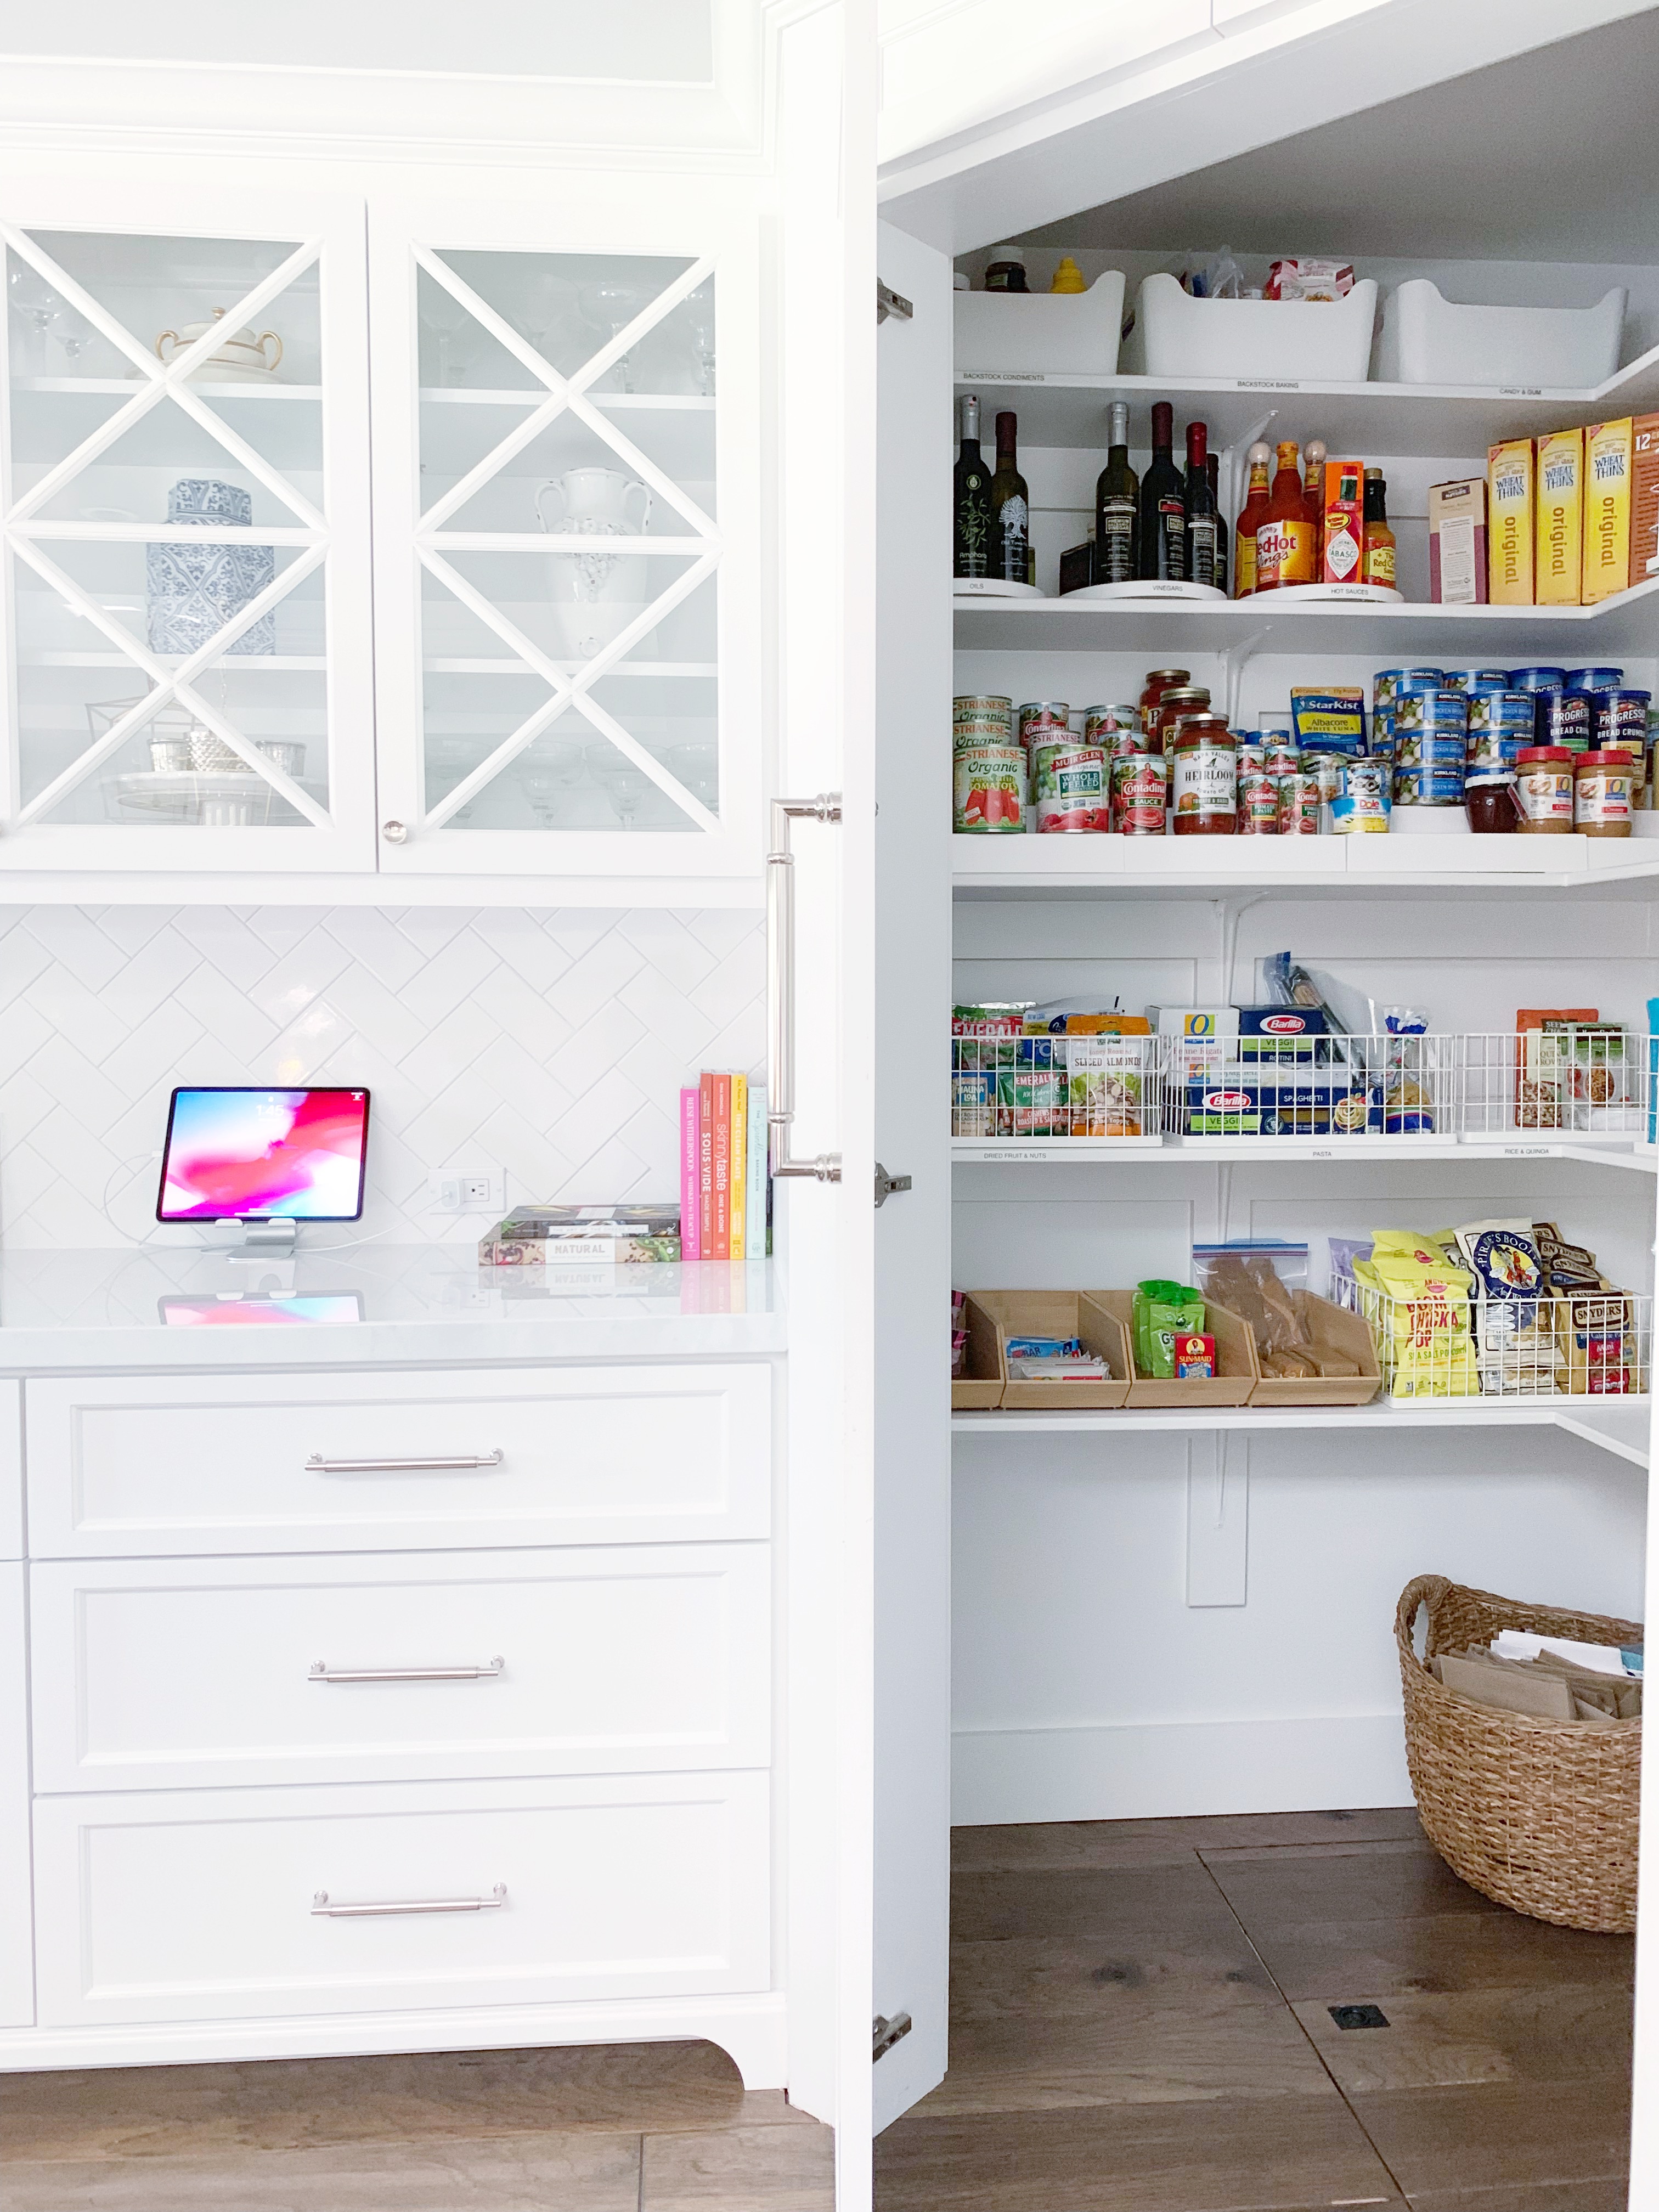 https://simplyorganized.me/wp-content/uploads/2019/06/gorgeous-white-walk-in-pantry-by-simply-organized.jpg